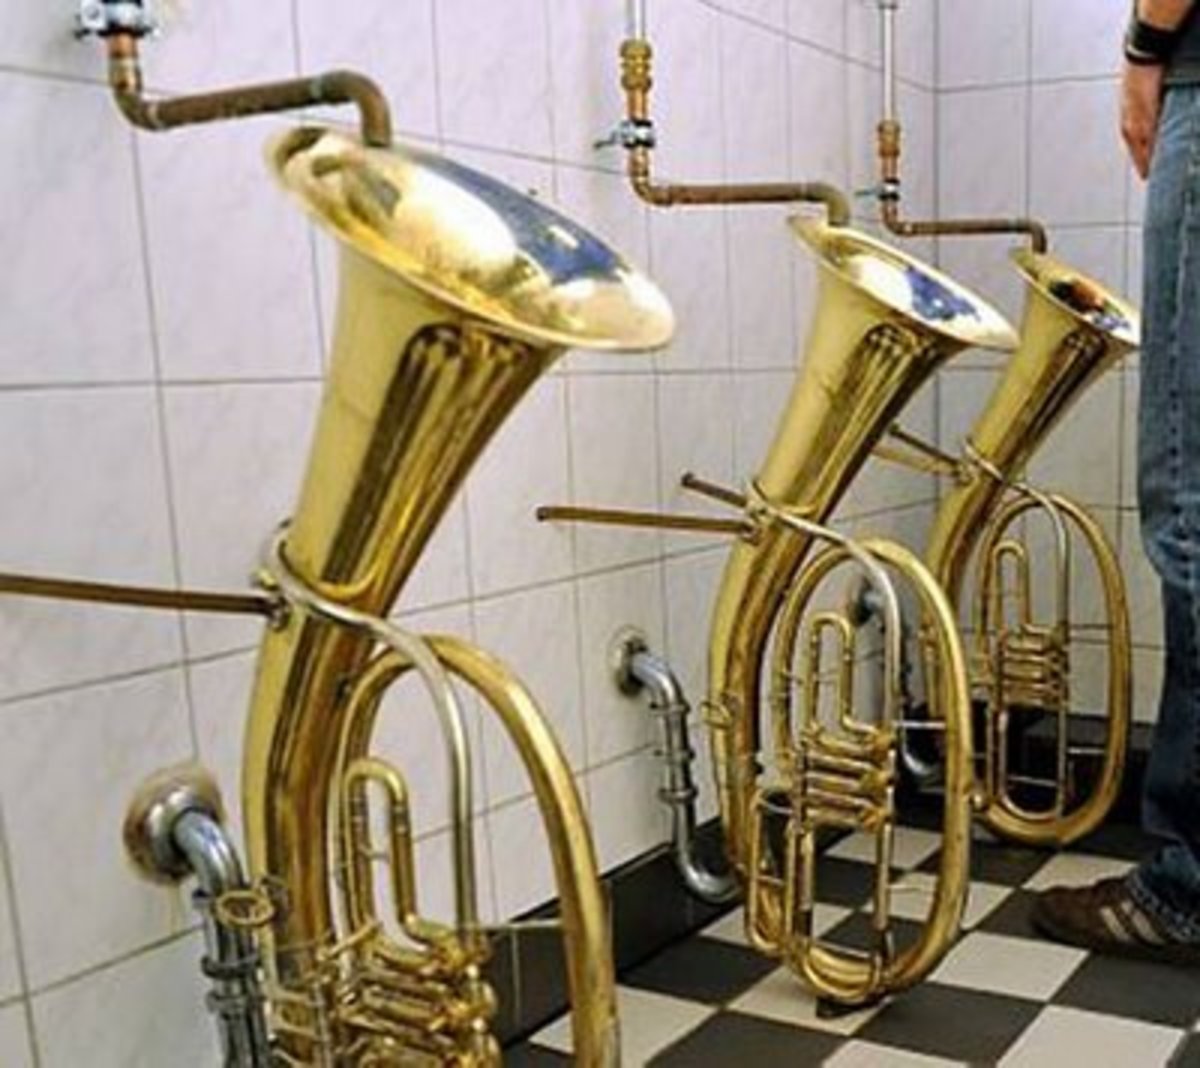 Tuba shaped urinals provide musical inspiration as you visit the restroom. No, they don't play music as you go!